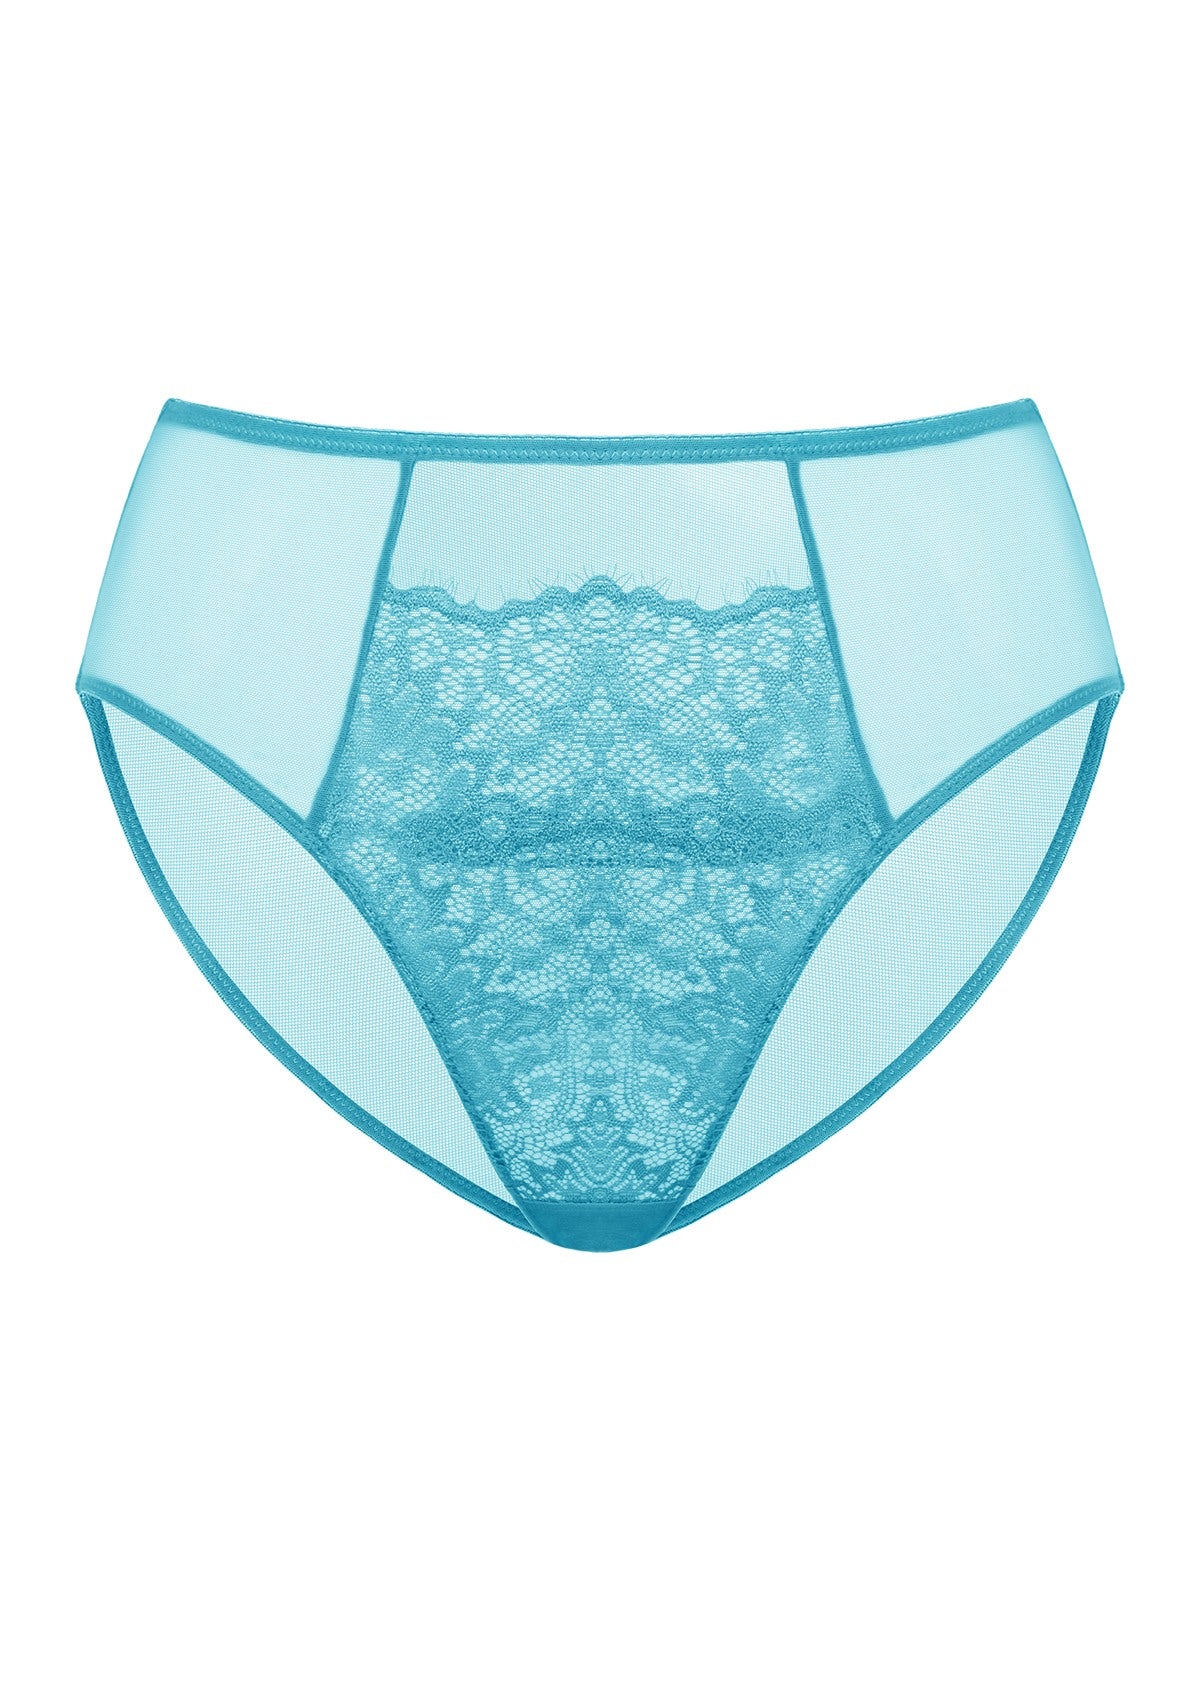 HSIA Spring Romance High-Rise Floral Lacy Panty-Comfort In Style - XXXL / Horizon Blue